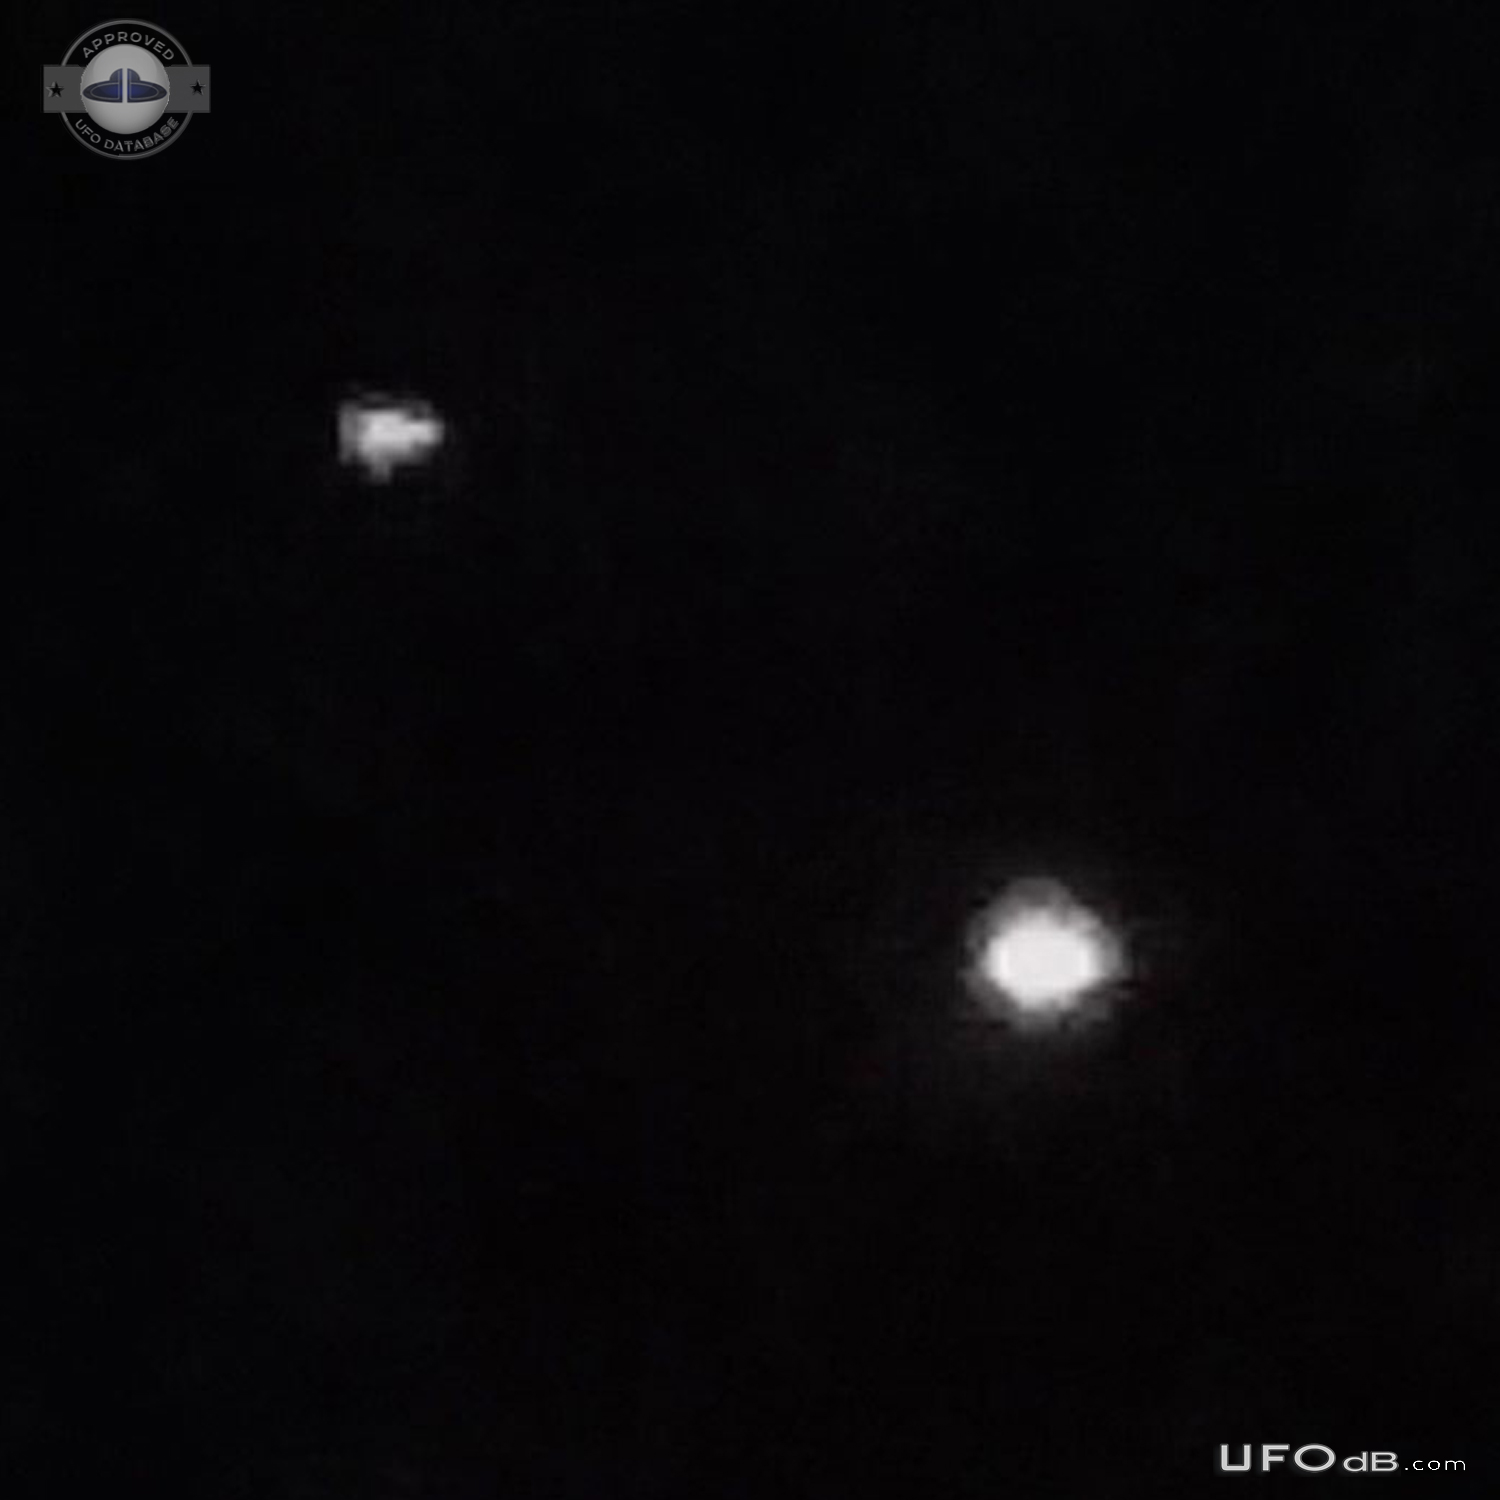 2 extremely bright lit objects stationary in sky for lenghthy period UFO Picture #744-4